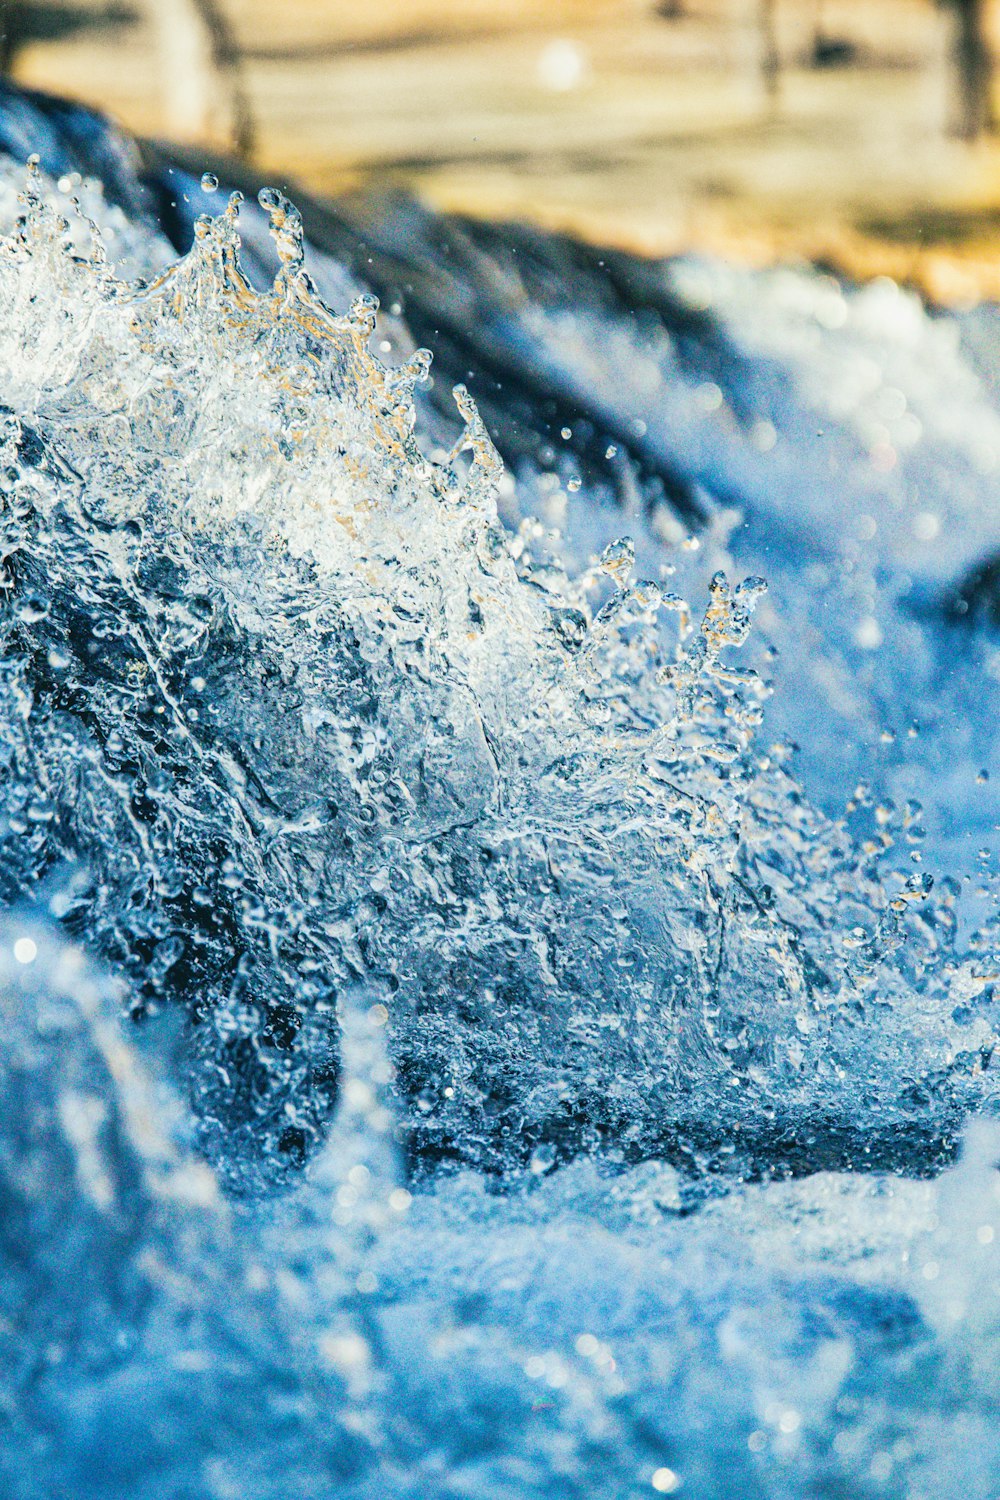 a close up of water splashing on the surface of a body of water